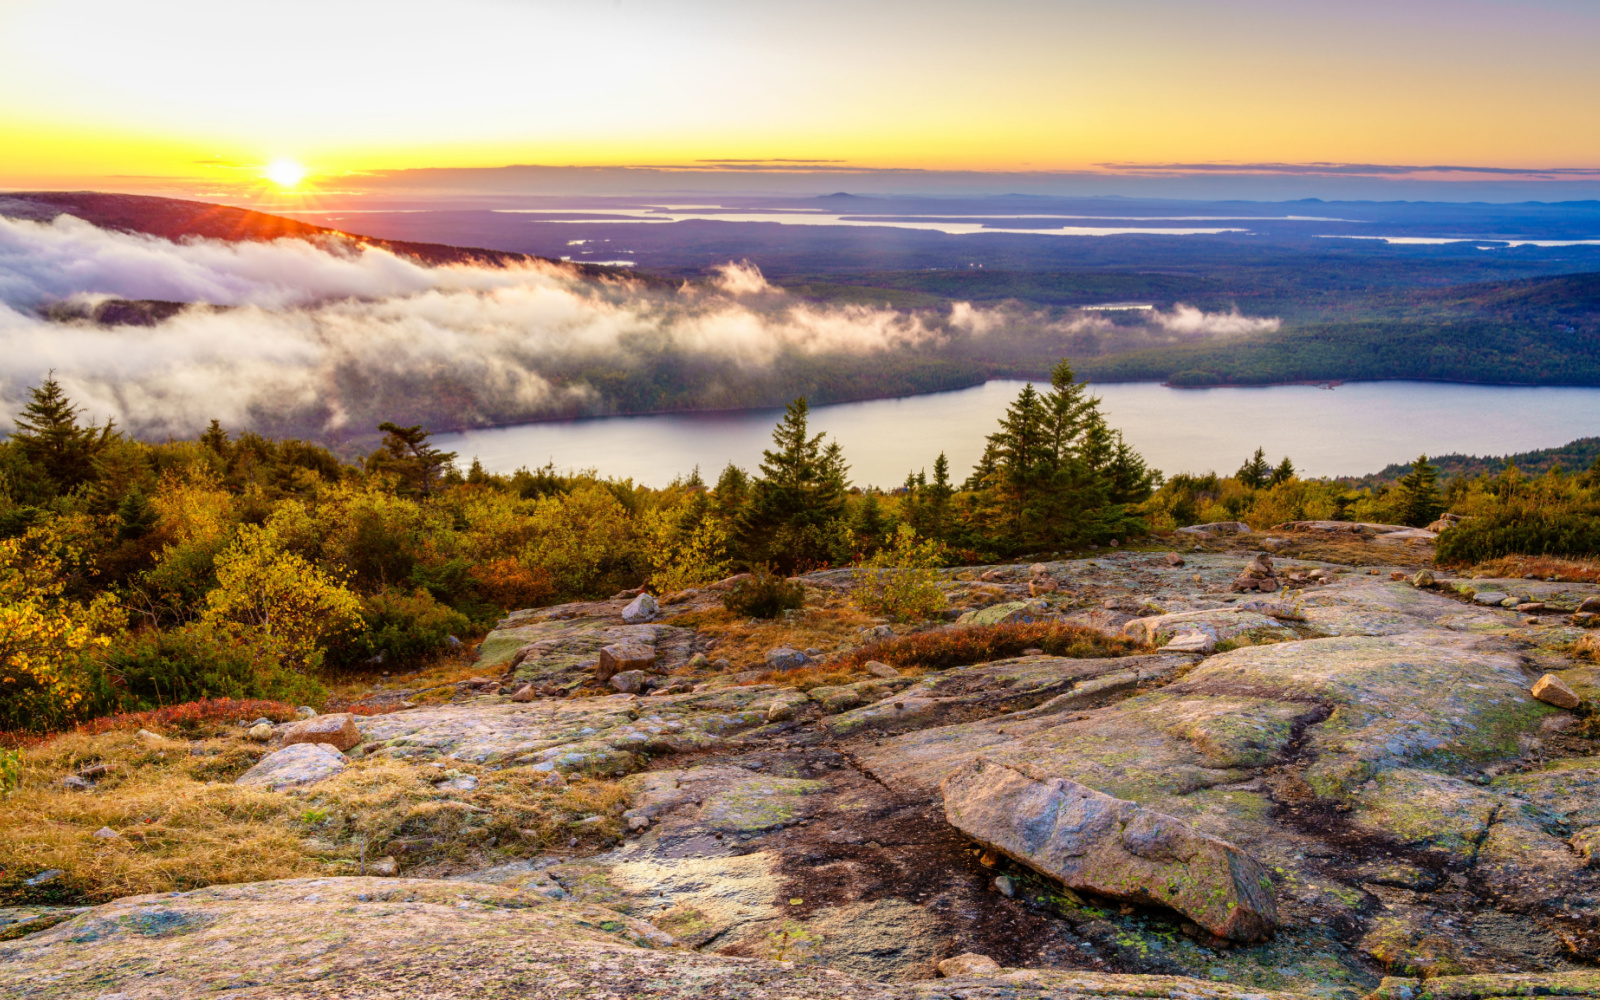 Where to Stay in Acadia National Park in 2023